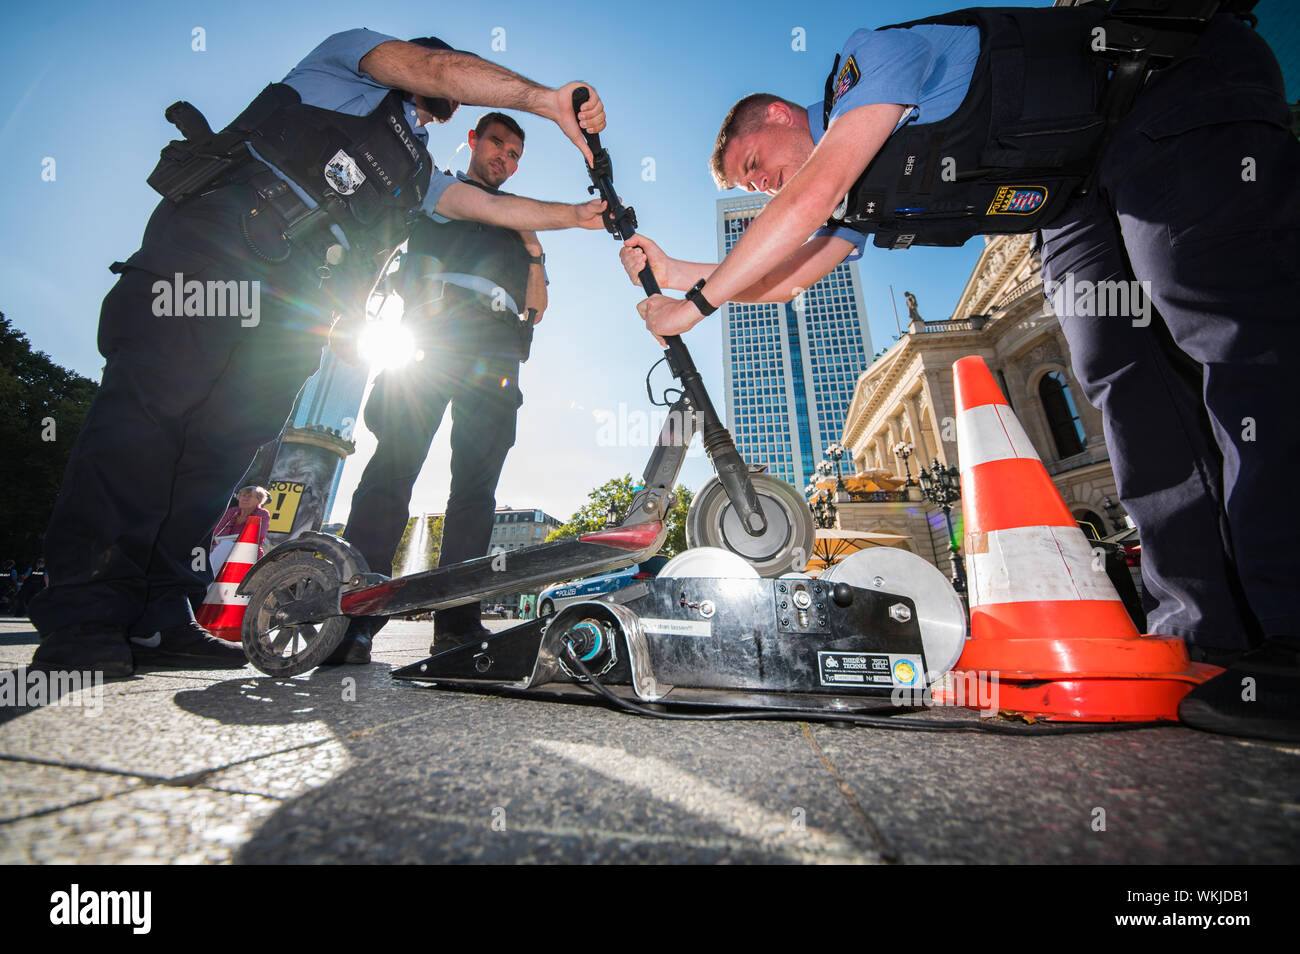 04 September 2019, Hessen, Frankfurt/Main: Police officers check an  e-scooter at a police check on the chassis dynamometer. Police officers  check e-scooters in front of the Alte Oper. According to police reports,